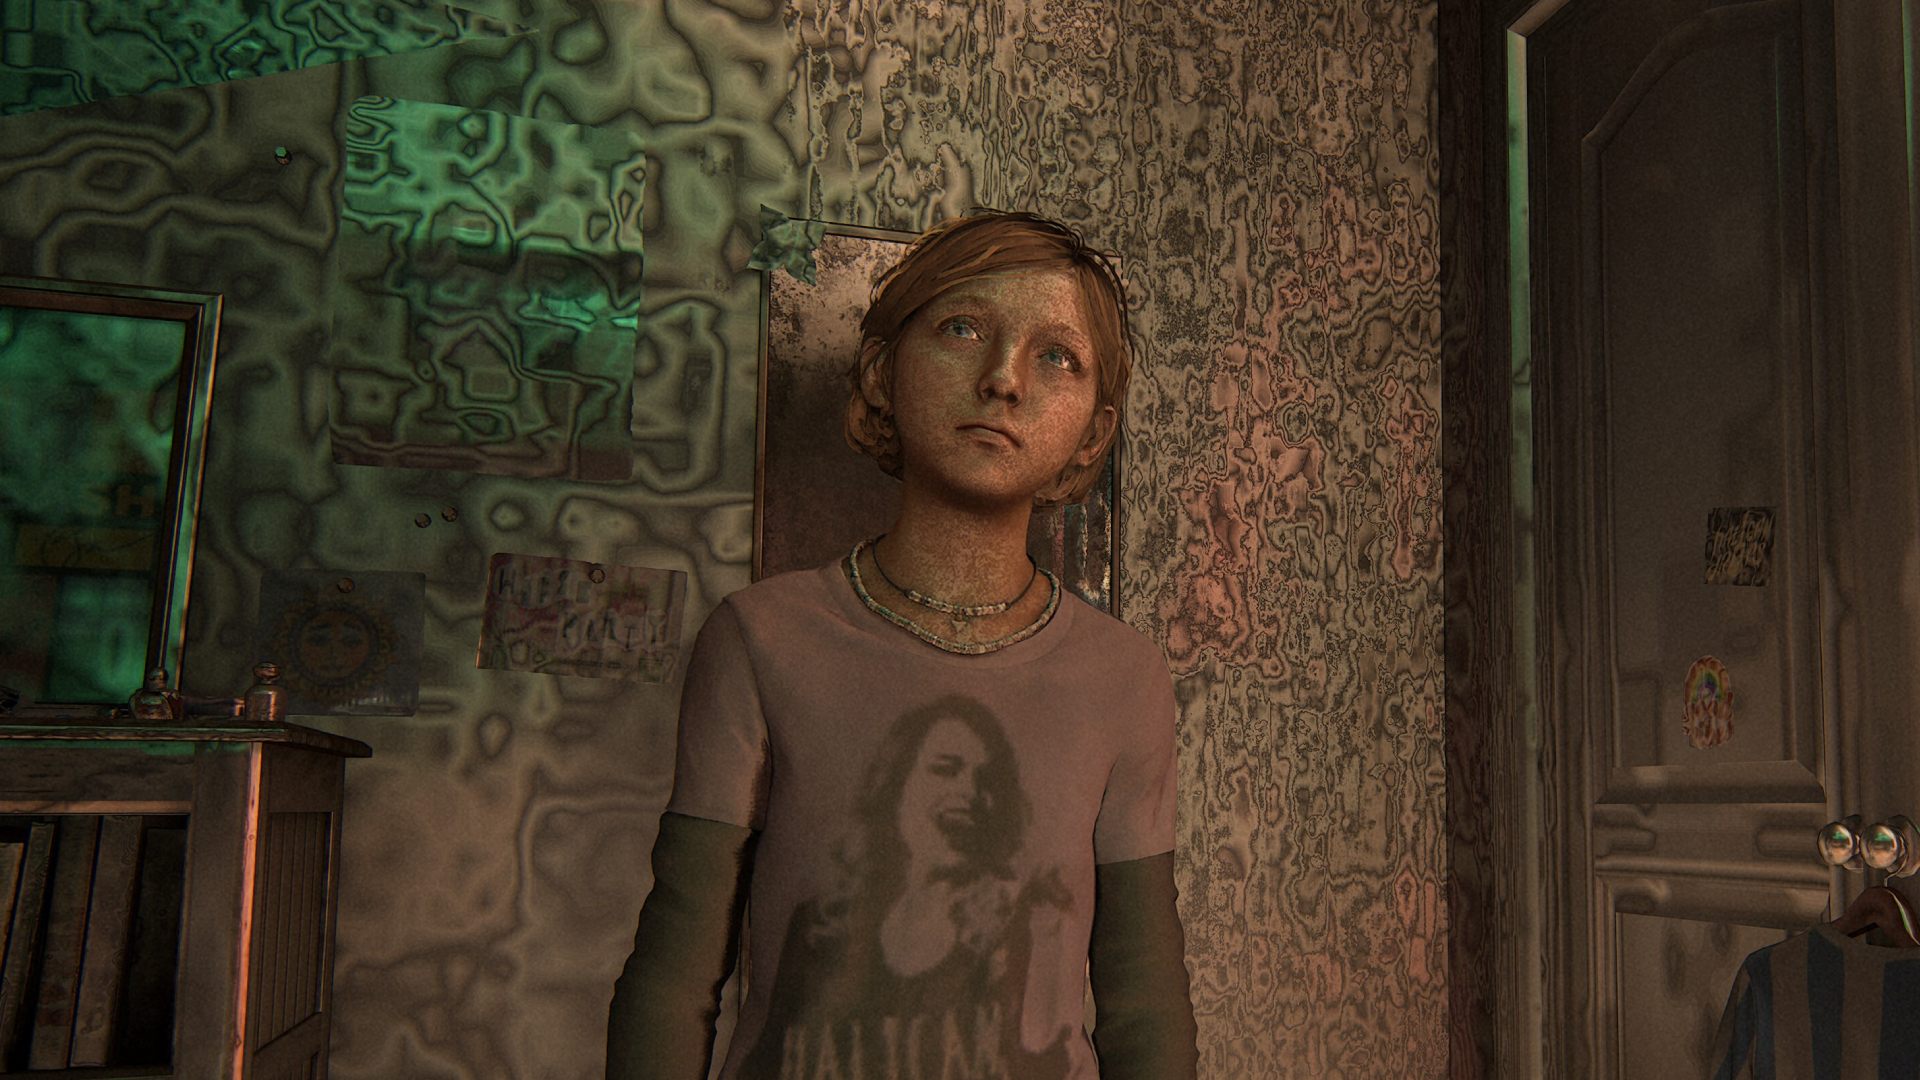 The Last of Us building shaders issue: Sarah standing in bedroom with texture issues